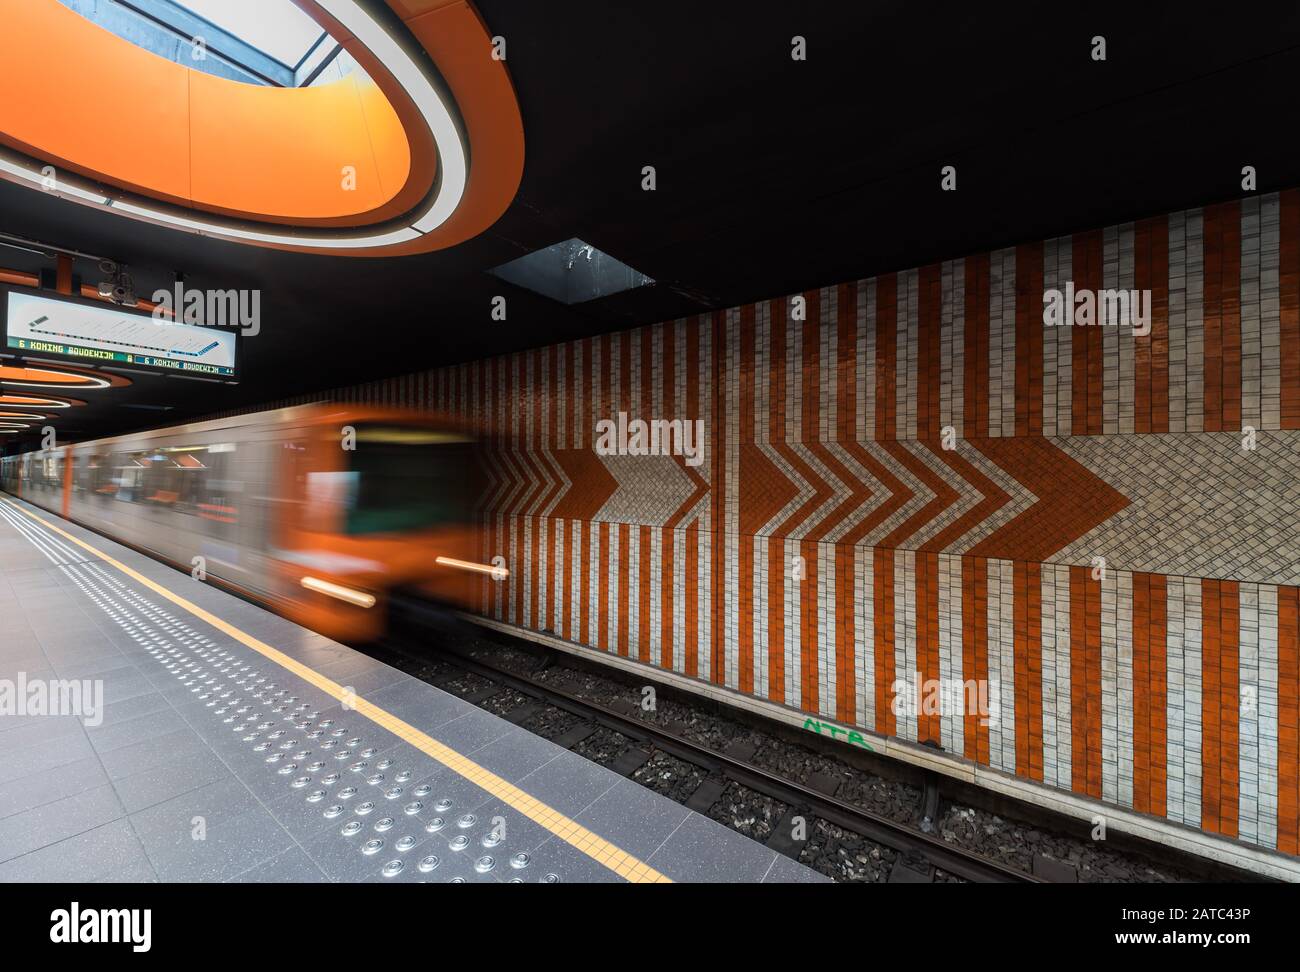 Laeken, Brussels Capital Region / Belgium - 09 25 2019: Metro train entering with high speed and blurred out lines in orange Stock Photo